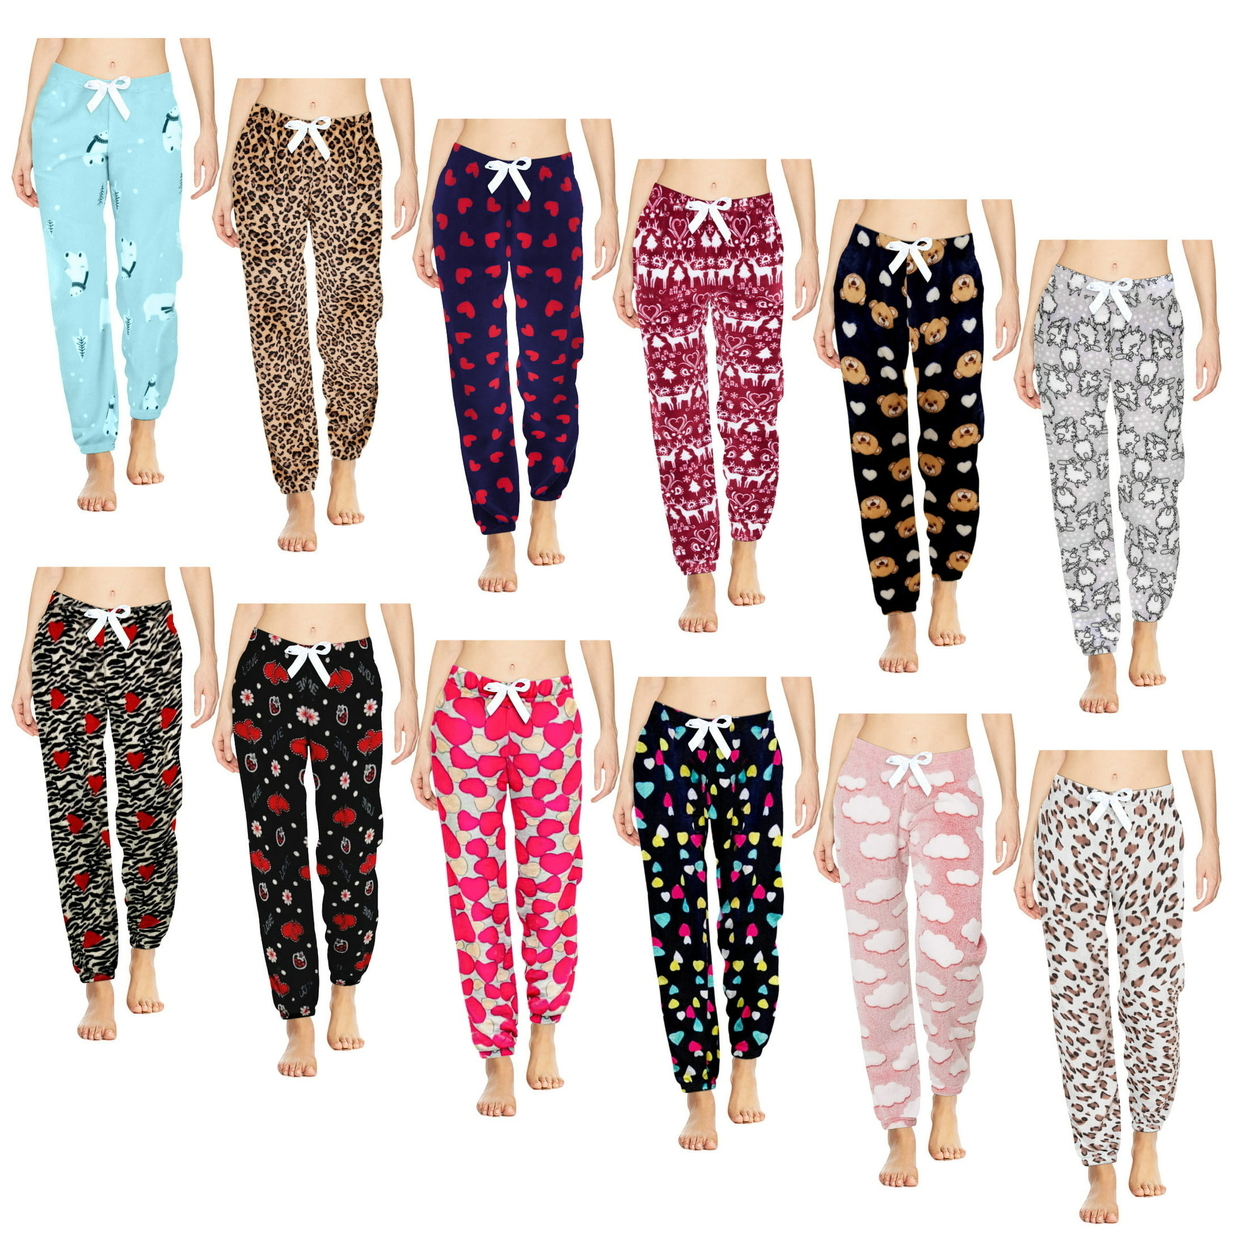 Multi-Pack: Women's Printed Ultra-Soft Comfy Stretch Micro-Fleece Pajama Lounge Pants - 3-pack, Shapes, Large